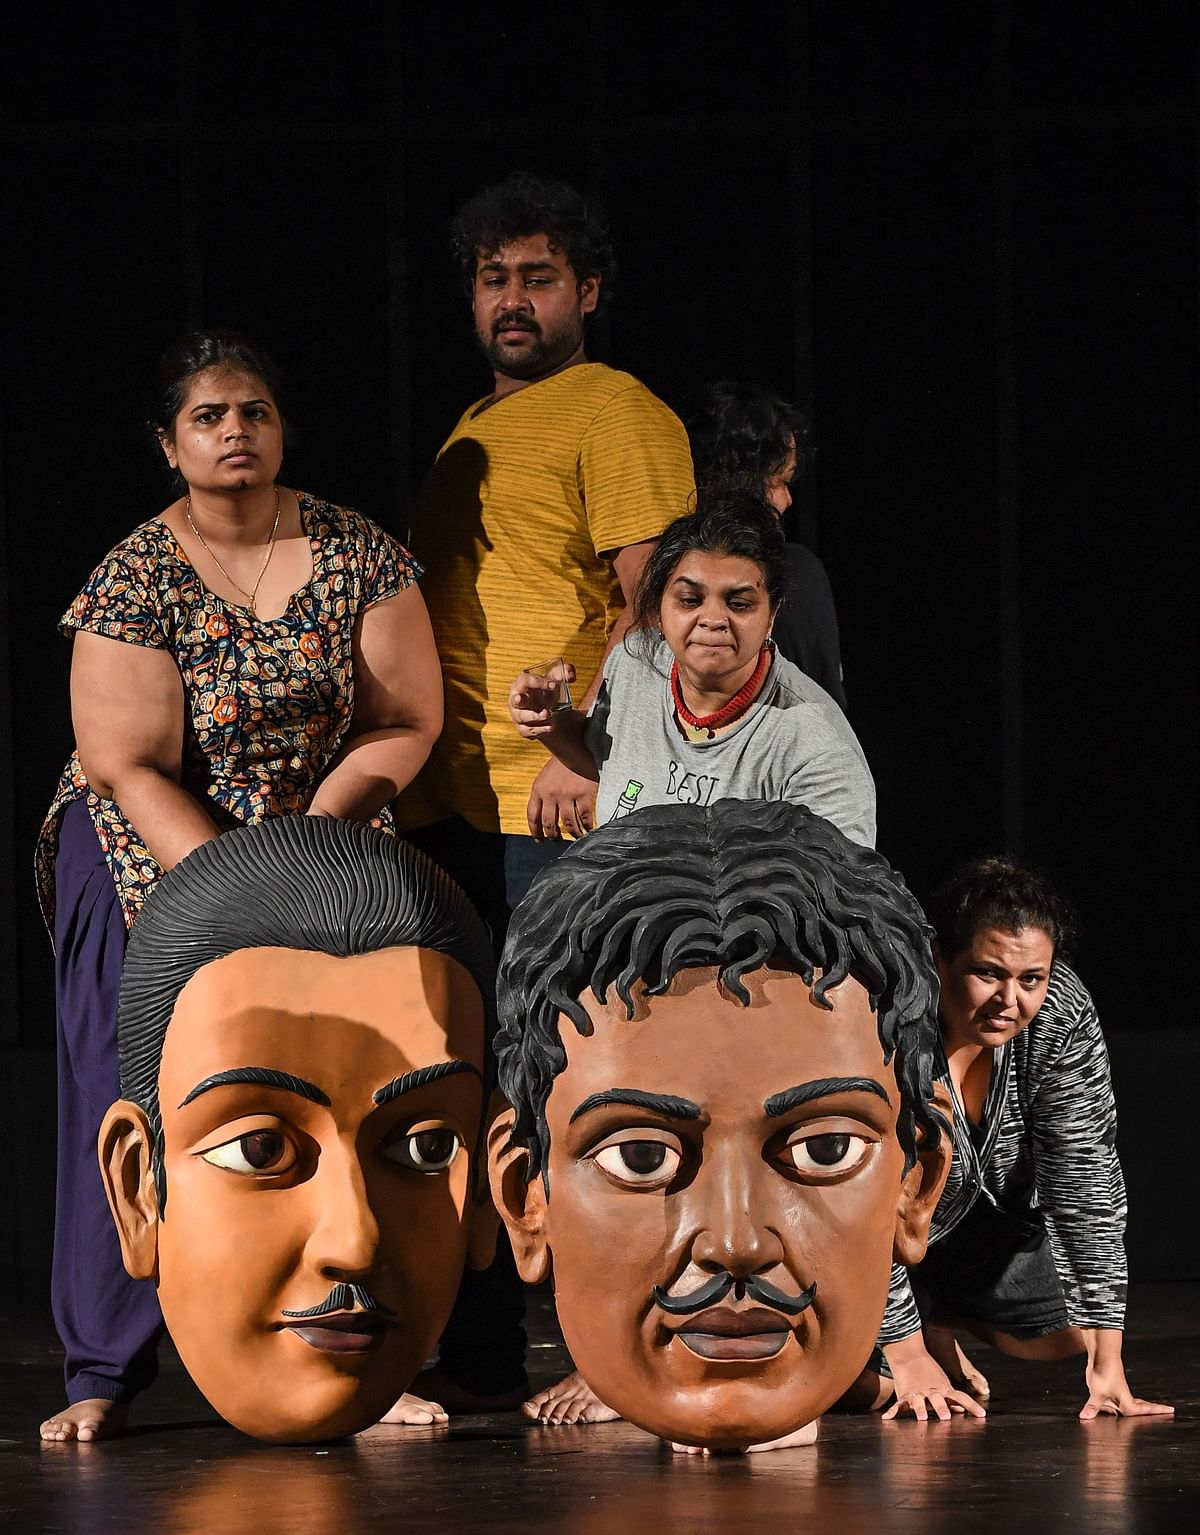 In this photo taken on 24 August 2019, performers take part in a rehearsal for the show `Head 2 Head` in a theatre at the Indian Habitat Centre in New Delhi. Photo: AFP